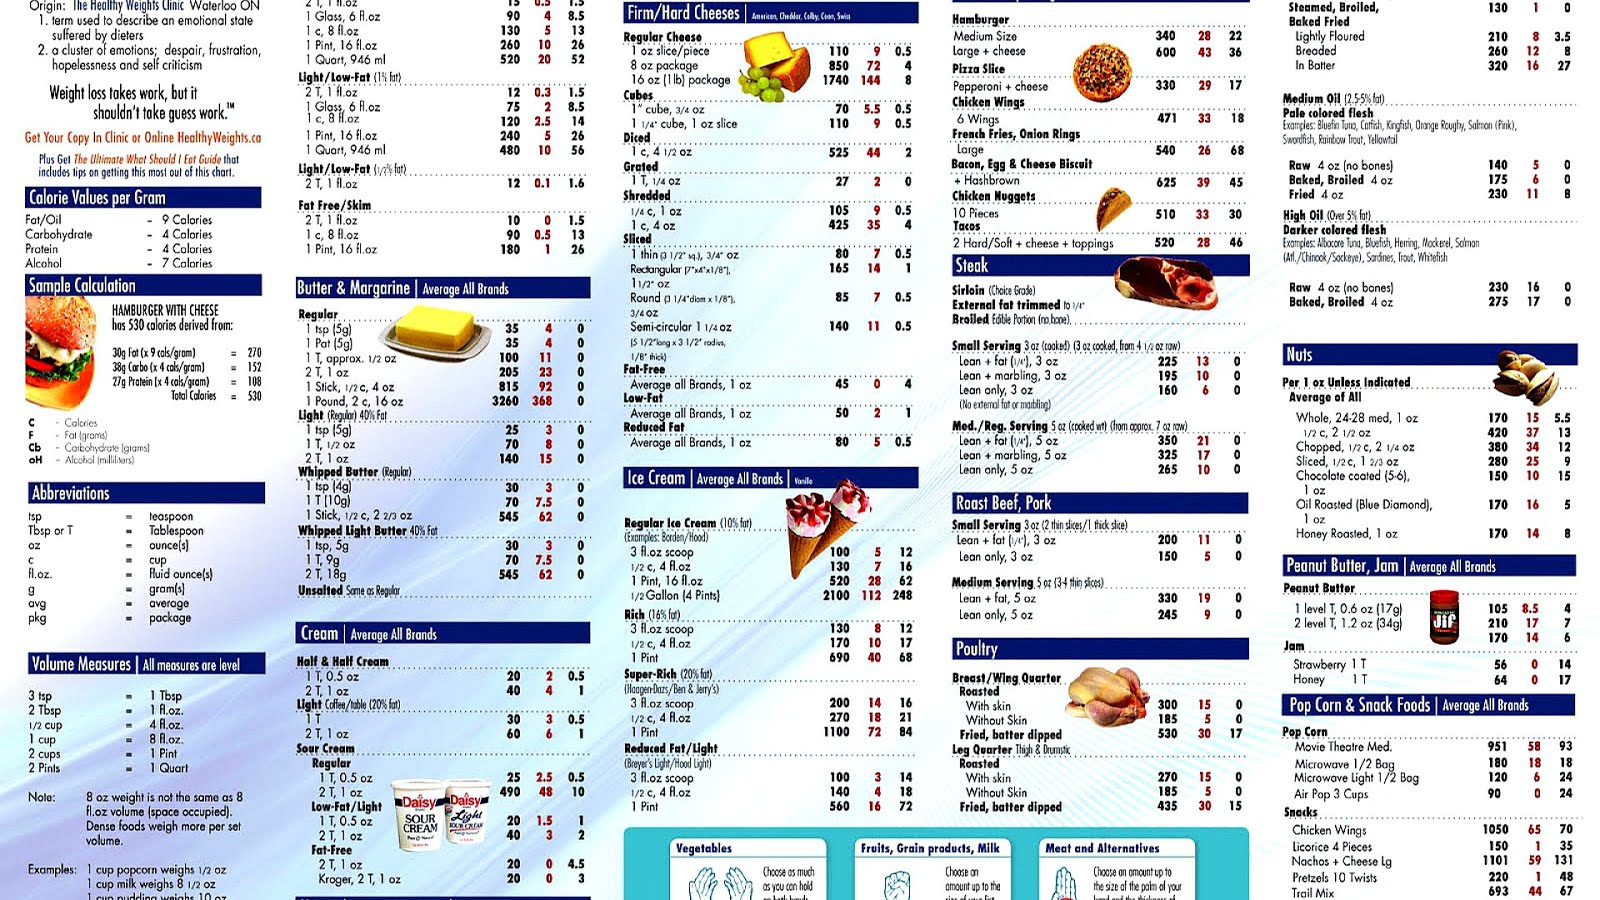 Calories Fruits And Vegetables Chart - Vege Choices